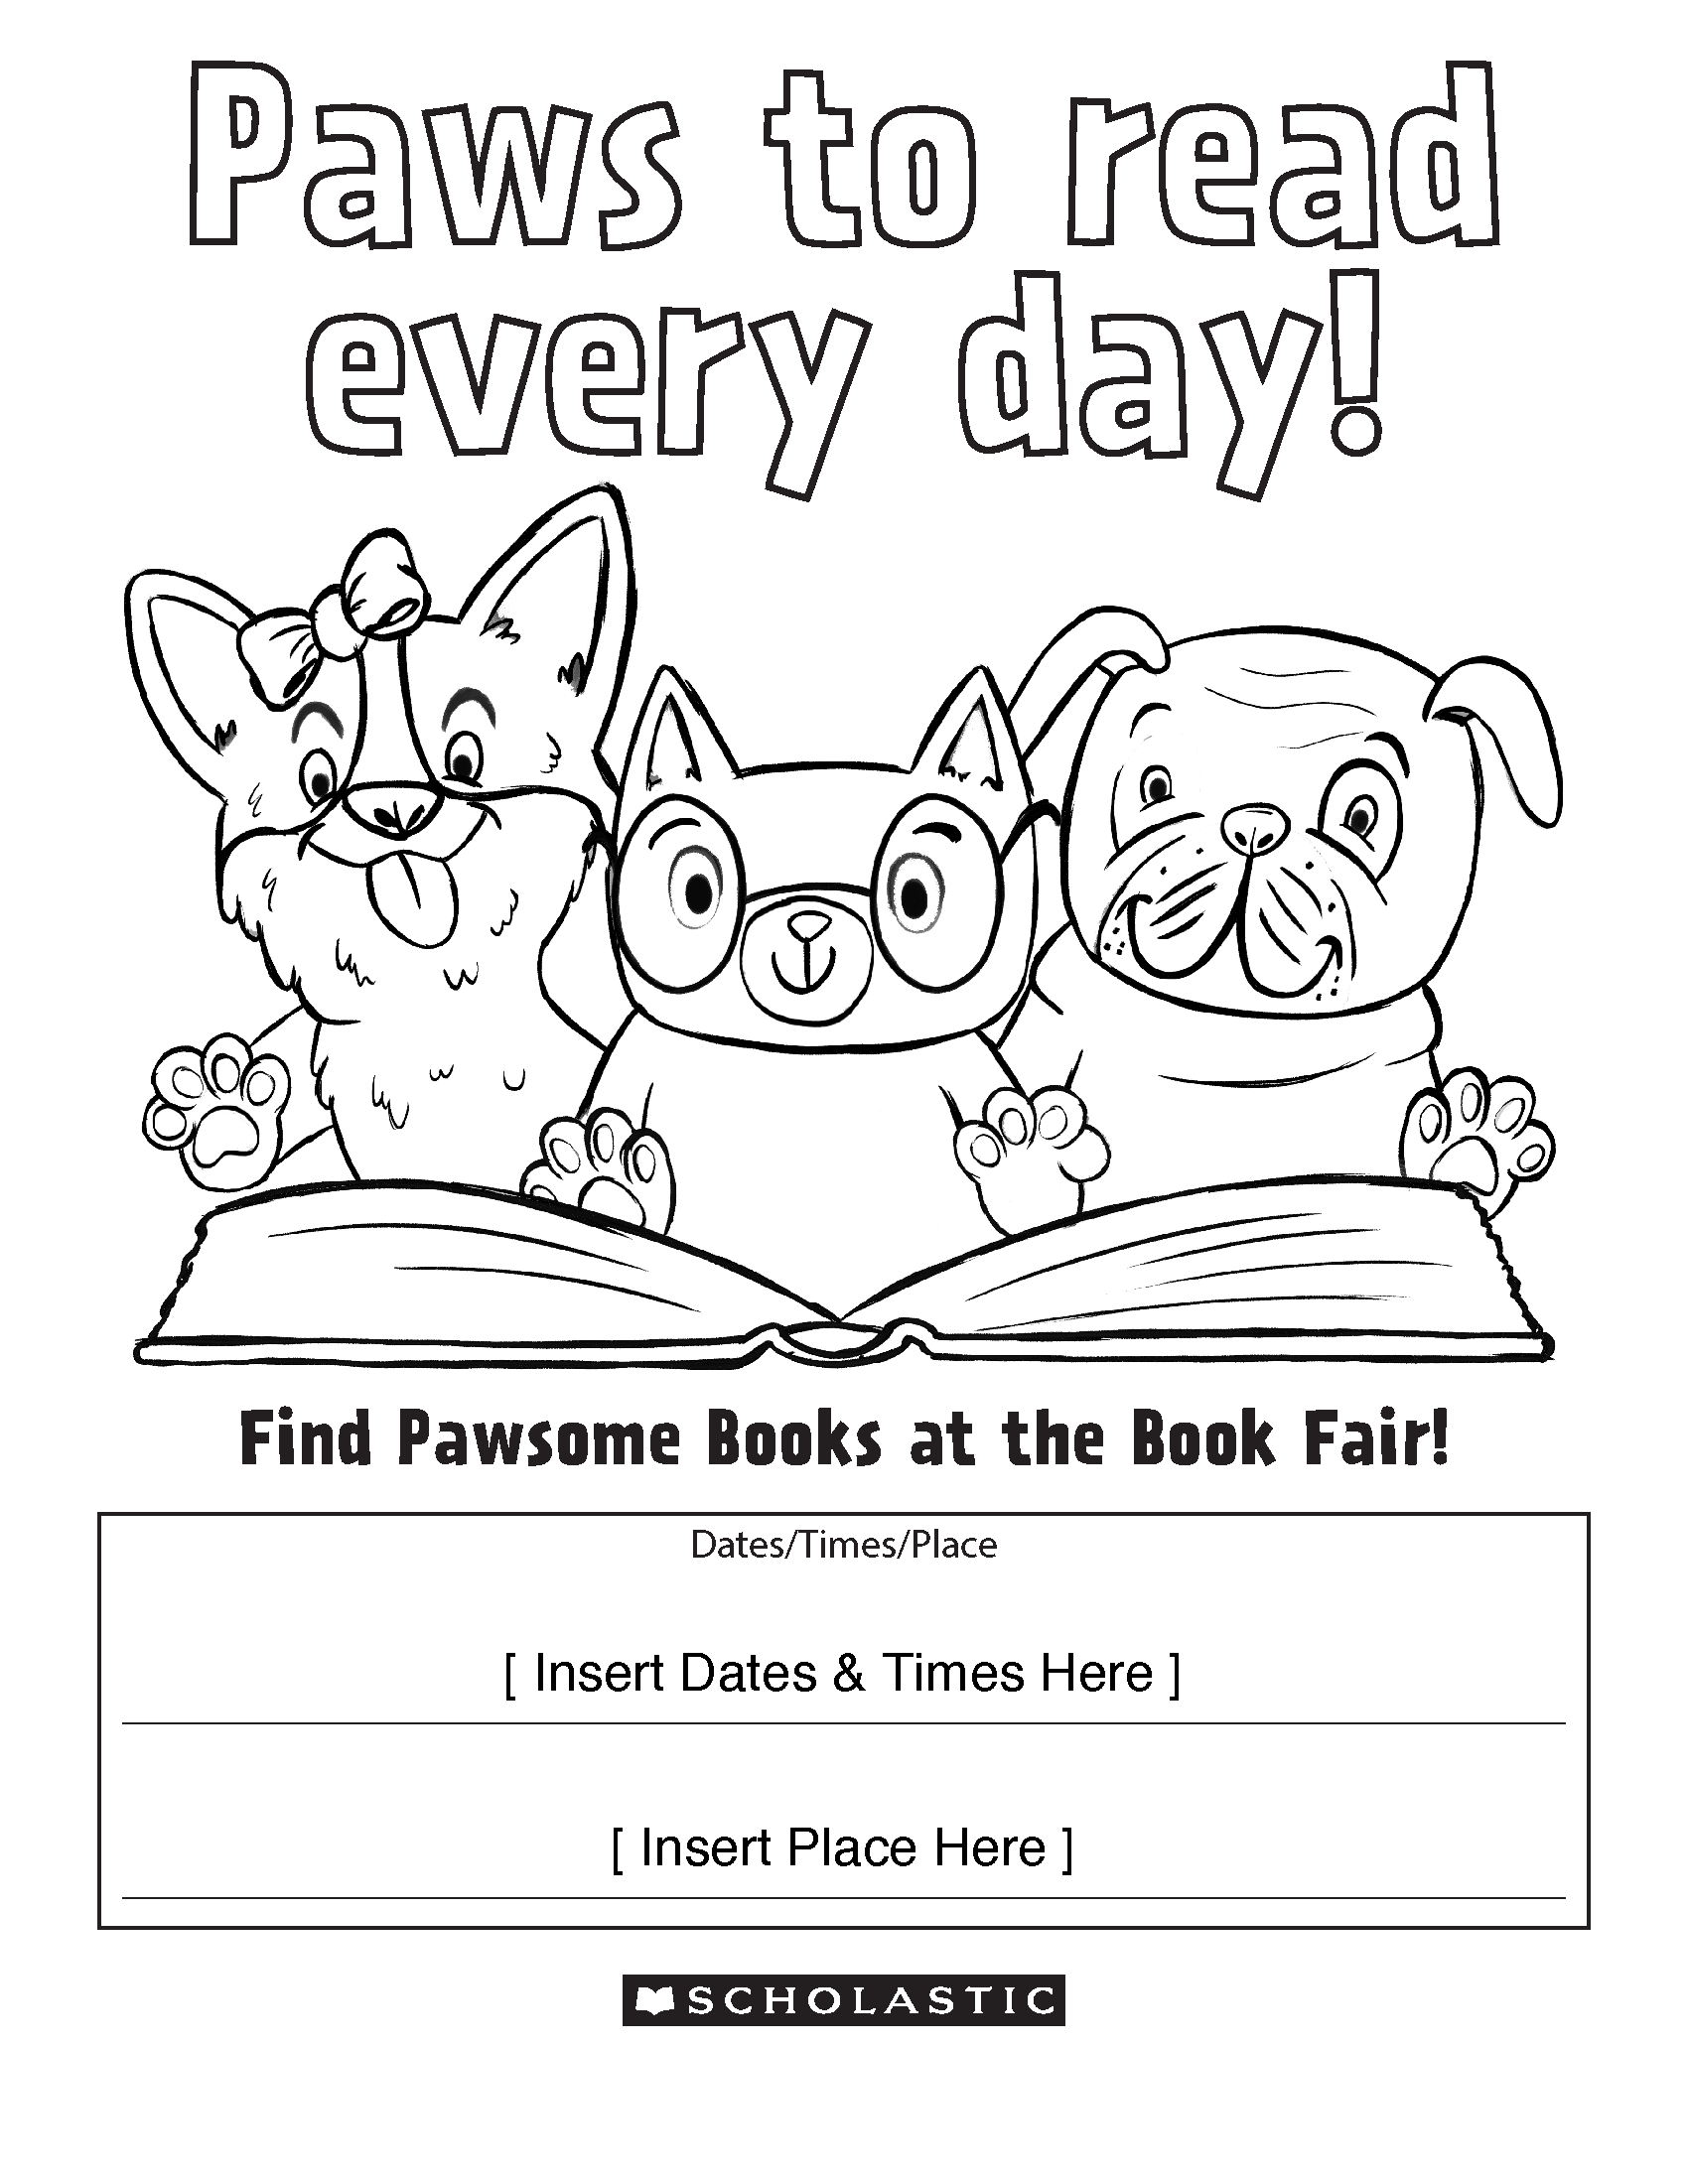 scholastic-book-fair-coloring-pages-thousand-of-the-best-printable